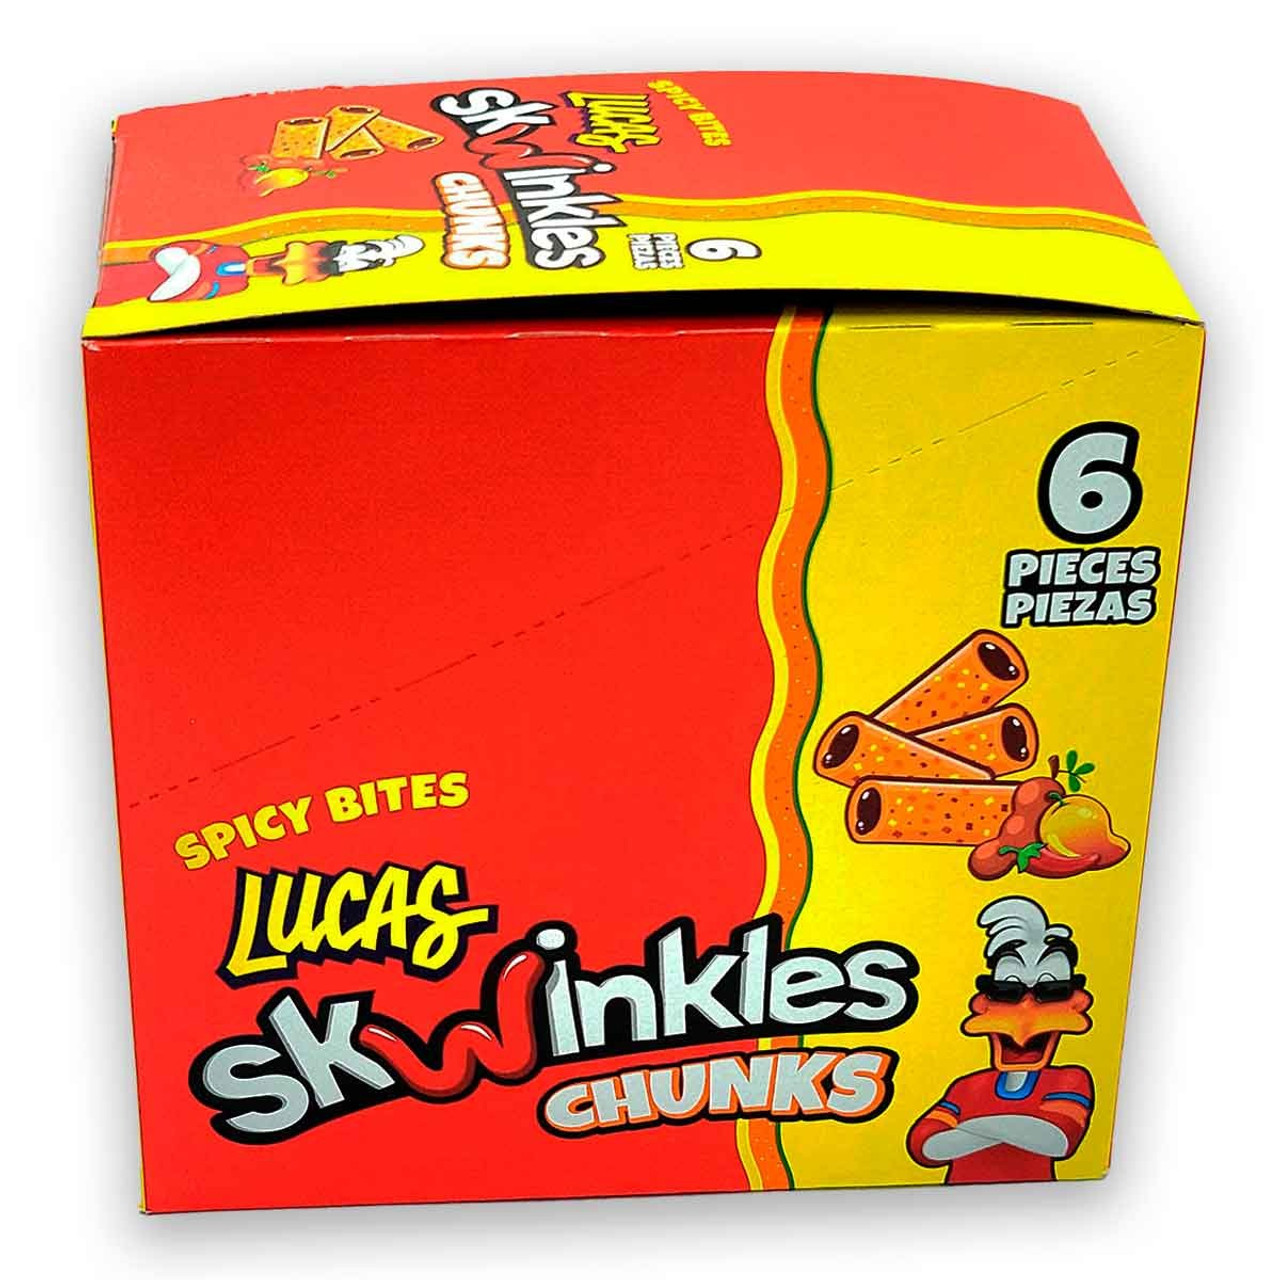 https://cdn11.bigcommerce.com/s-k2eyh8/images/stencil/1280x1280/products/992/2485/my_mexican_candy_lucas_skwinkles_chunks_mango_spicy_bites_6_pieces_package__78185.1703707798.jpg?c=2